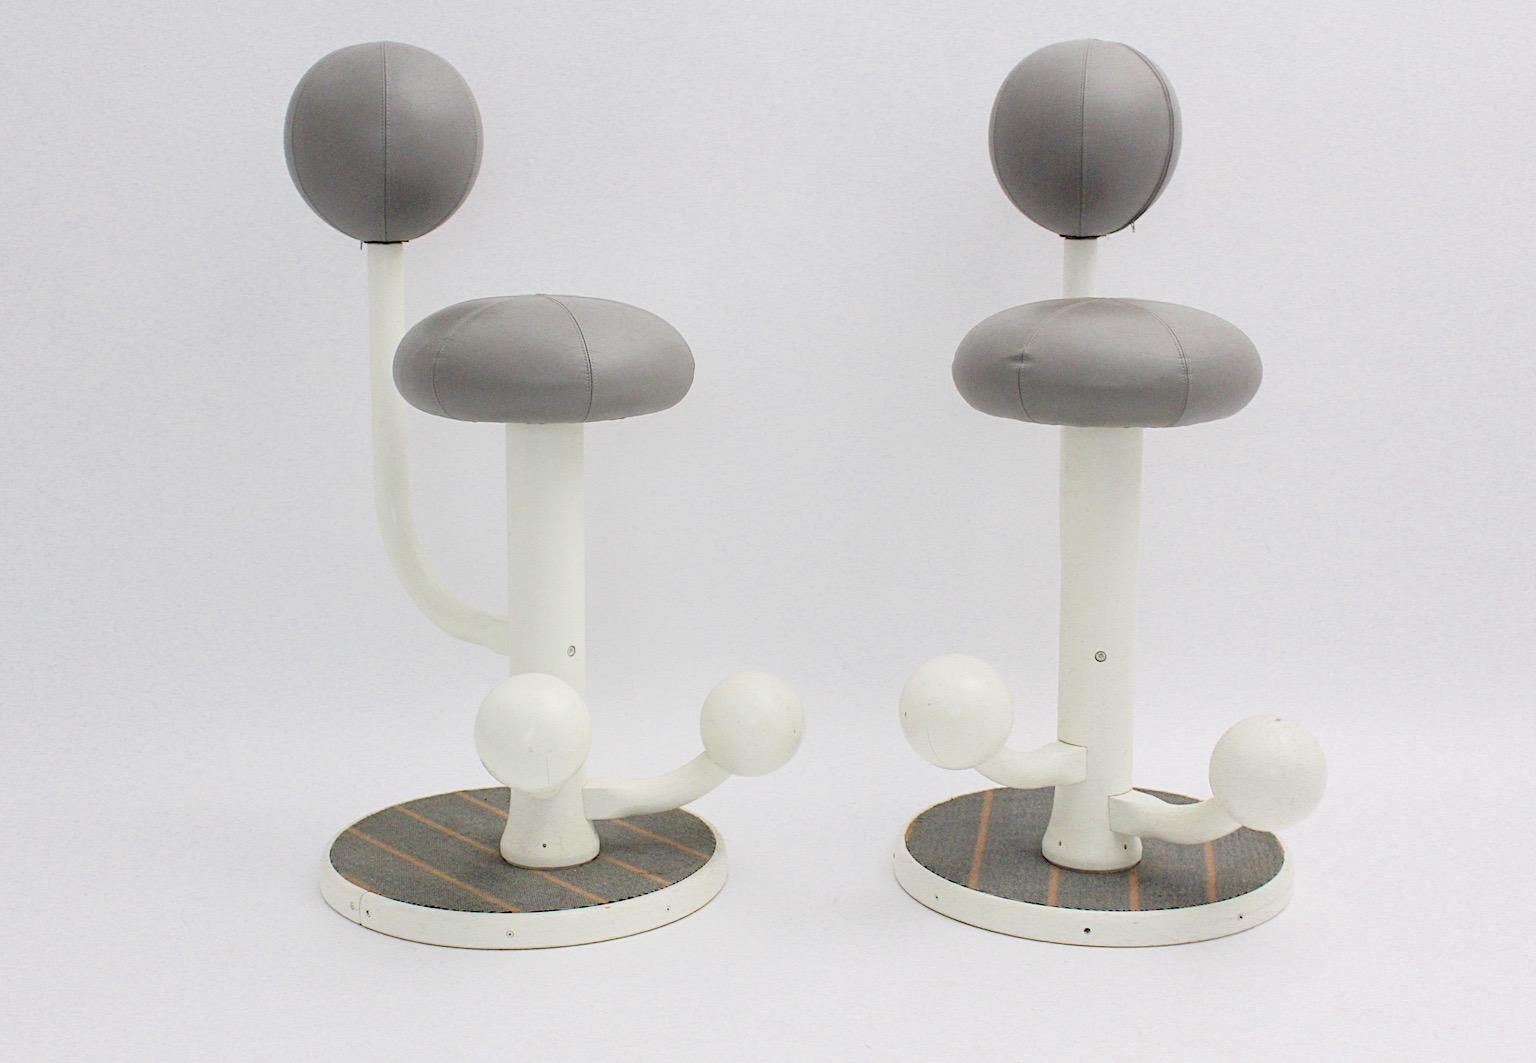 Organic Modern vintage bar stools pair duo by Peter Opsvik for Stokke Norge 1985 Norway.
A fantastic pair of bar stools made from white lacquered wood and grey faux leather, while the base is covered with grey carpet fabric with red stripes.
The